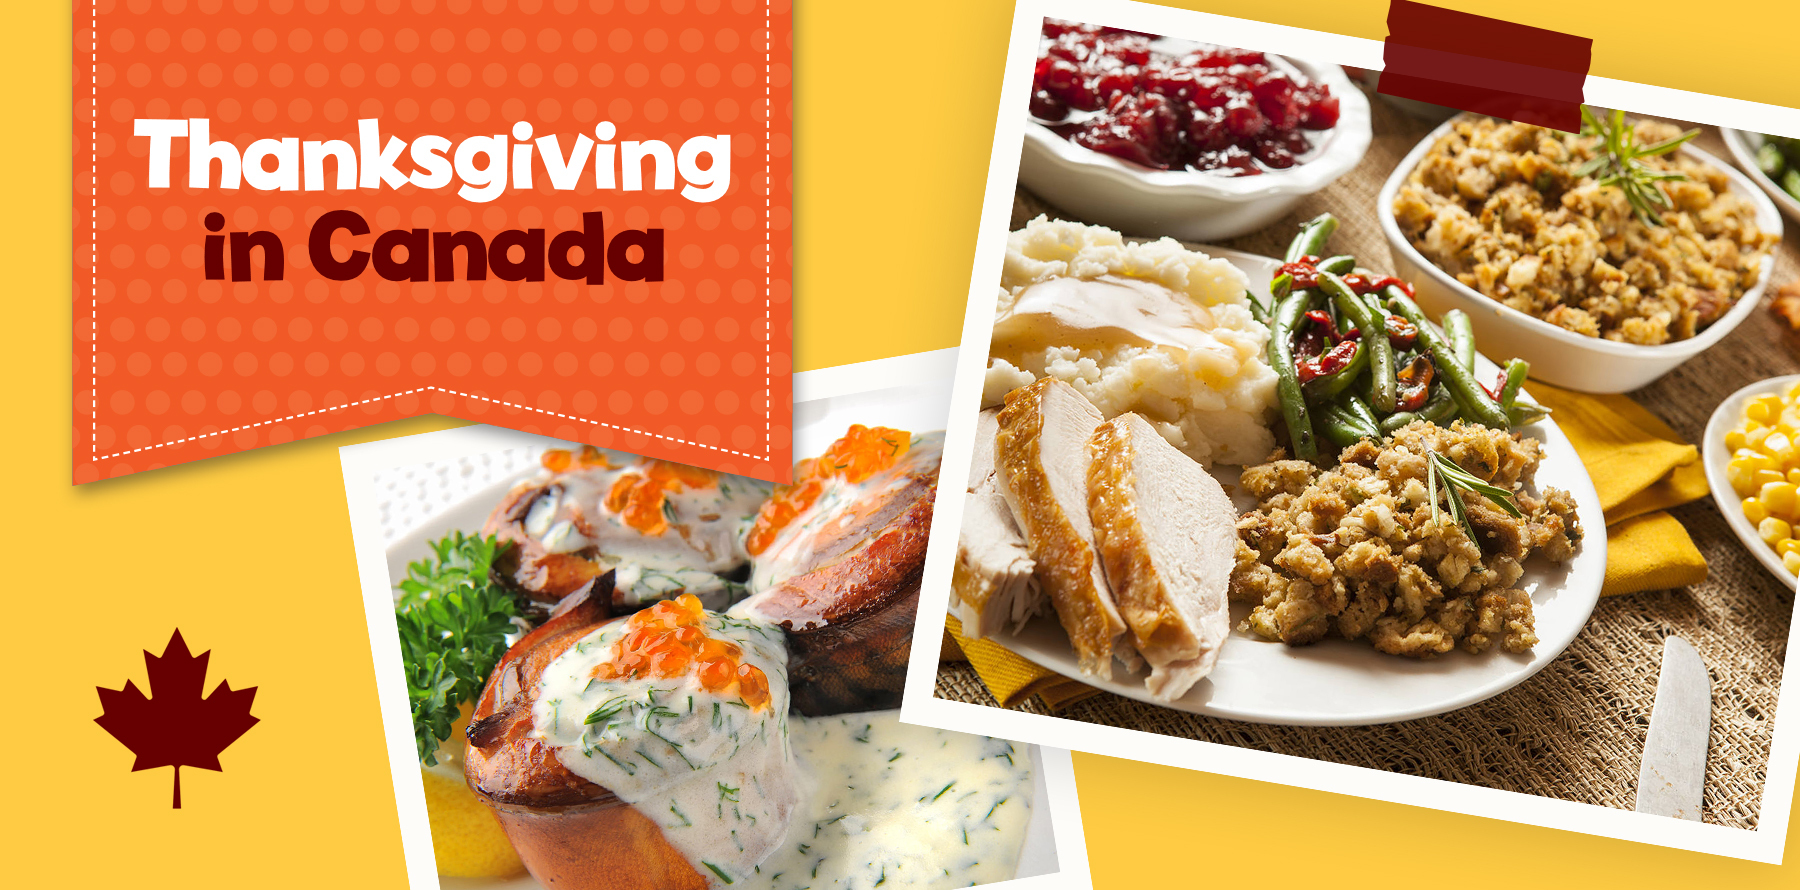 Thanksgiving Canada 2022: History, Date, Food - Foodgressing